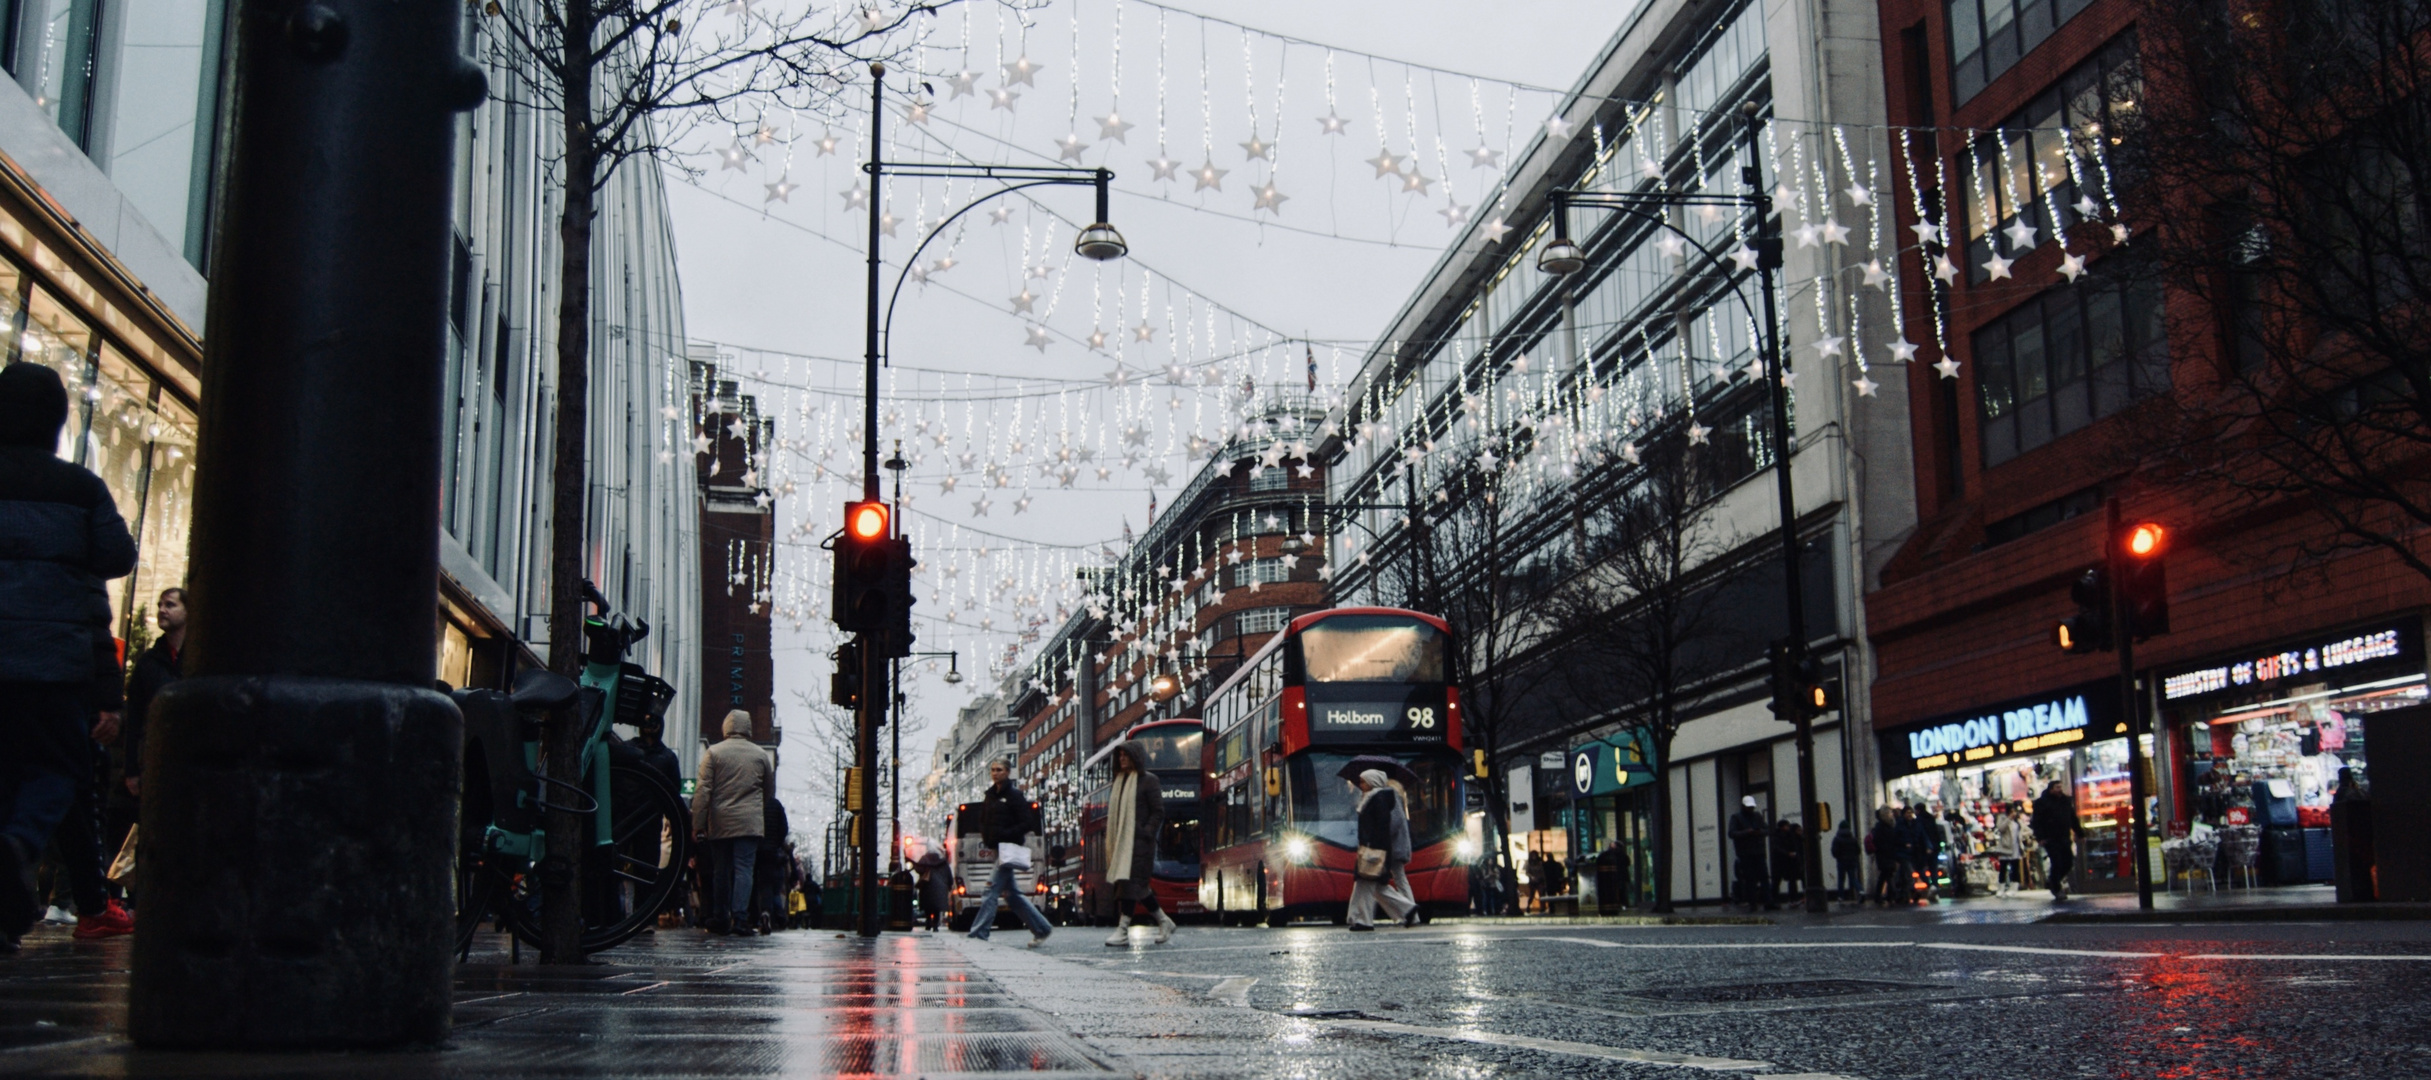 … the Oxford Street …